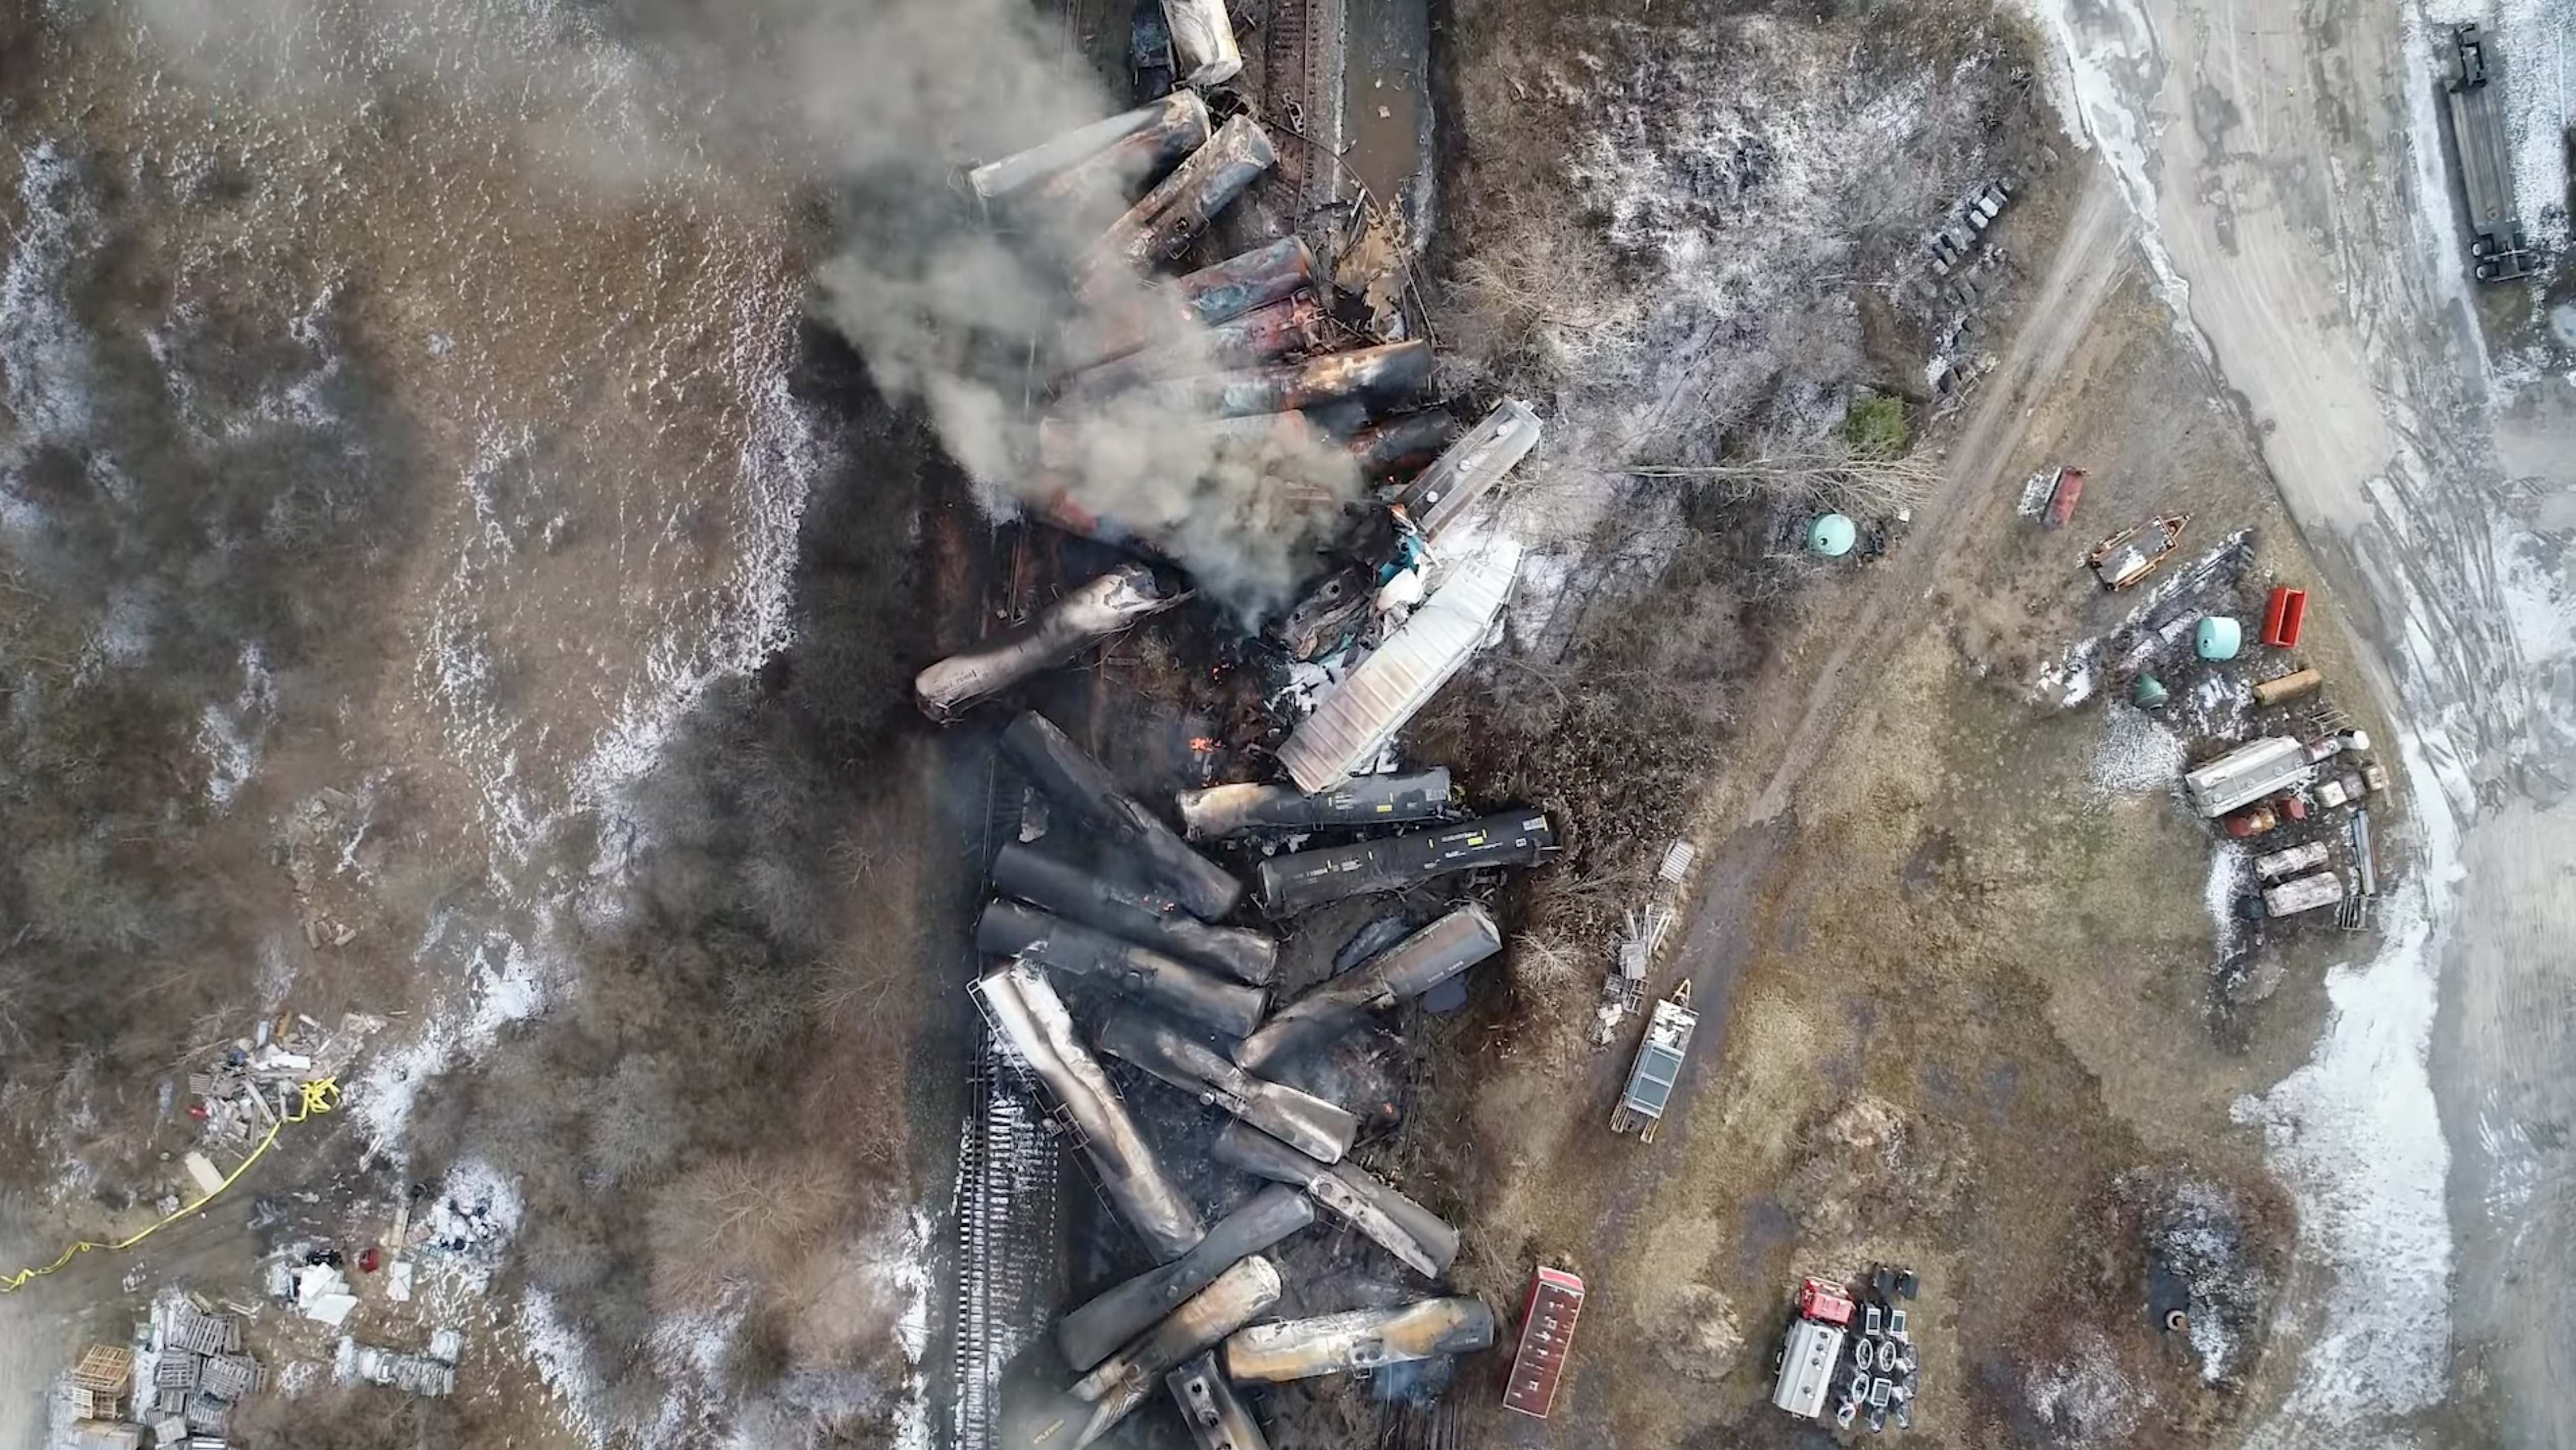 A drone footage shows the freight train derailment in East Palestine, Ohio